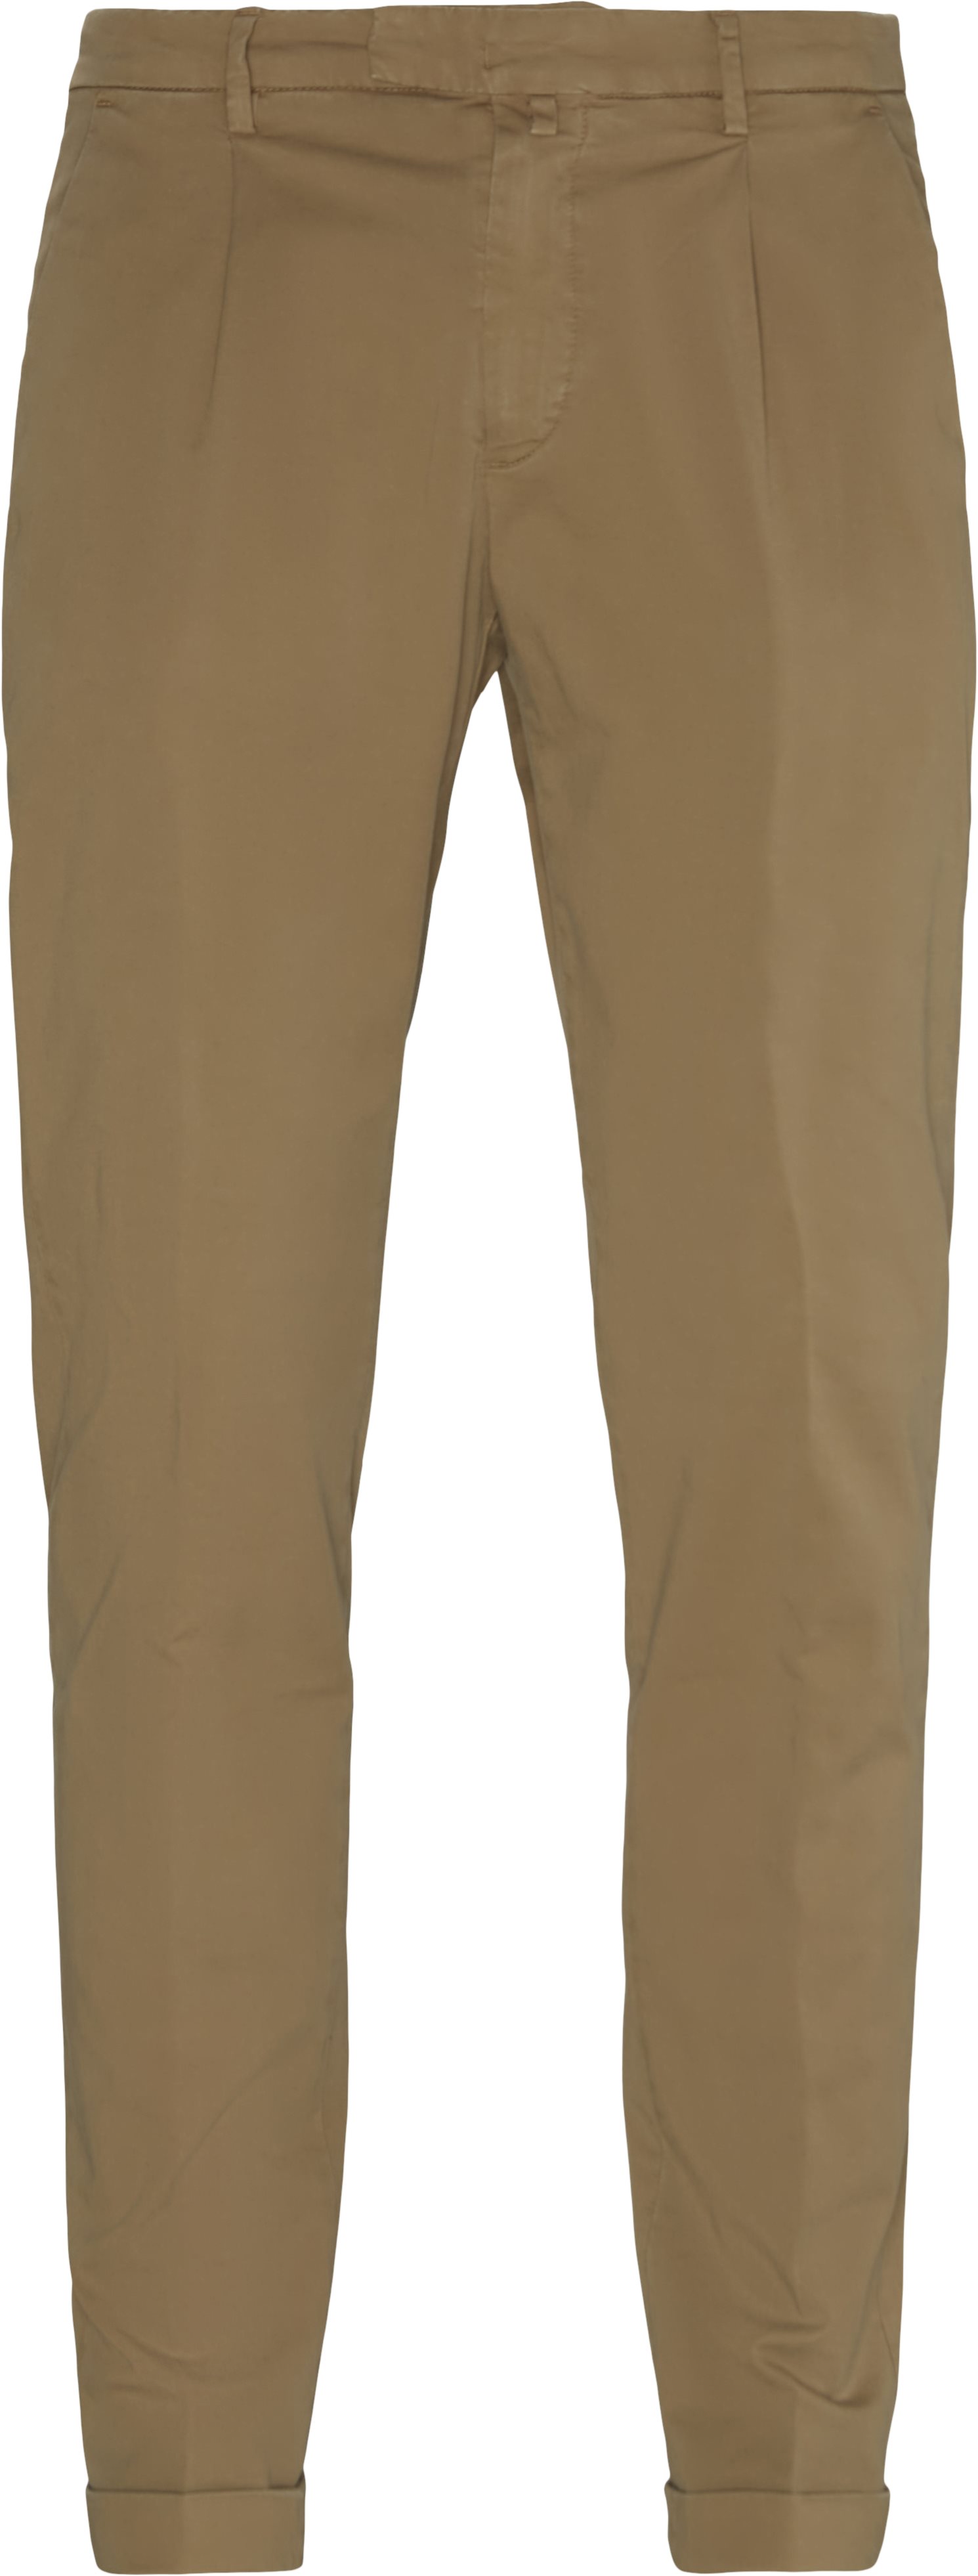 Chinos - Trousers - Slim fit - Sand